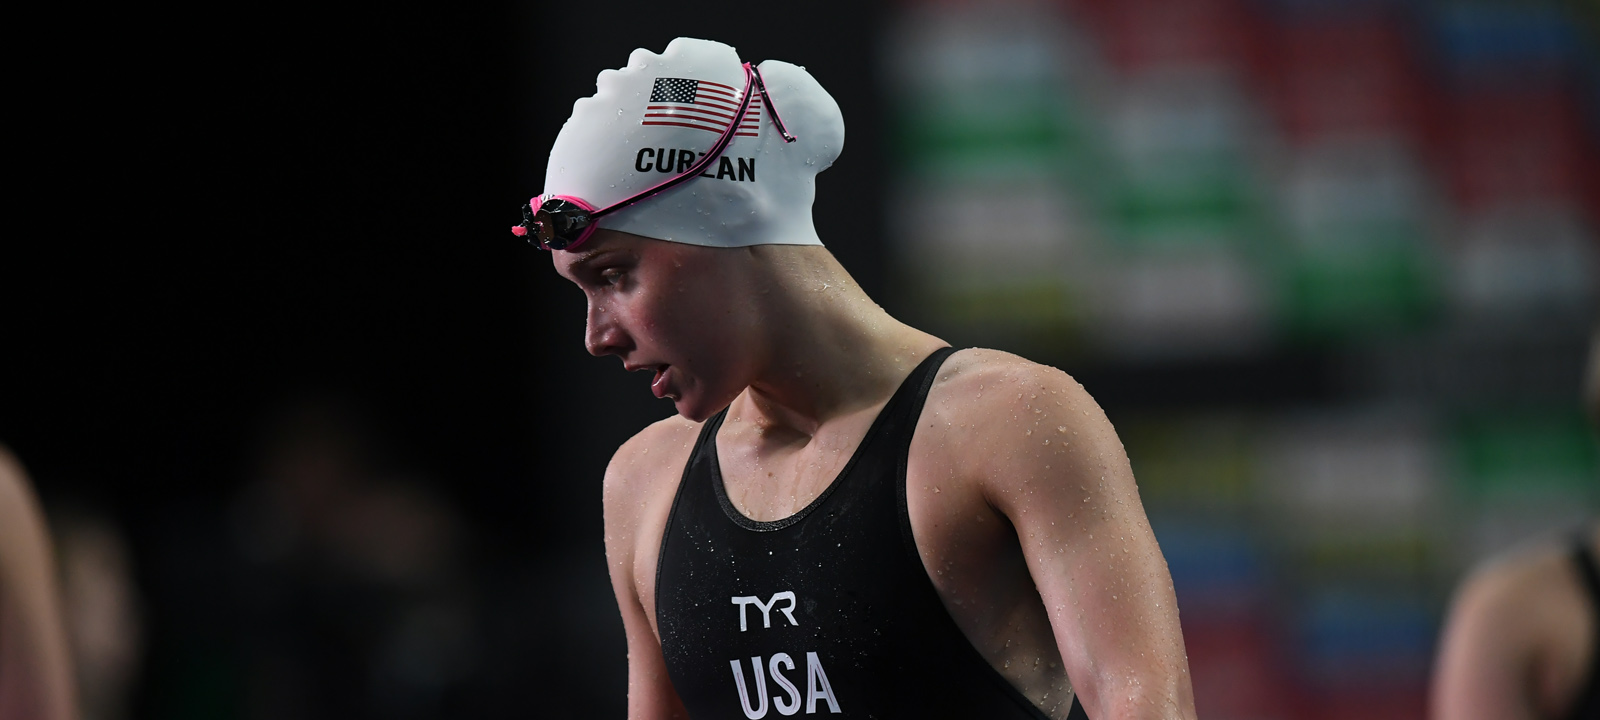 Budapest 2022, North America Day 3: Claire Curzan Deepens USA’s Podium Potential